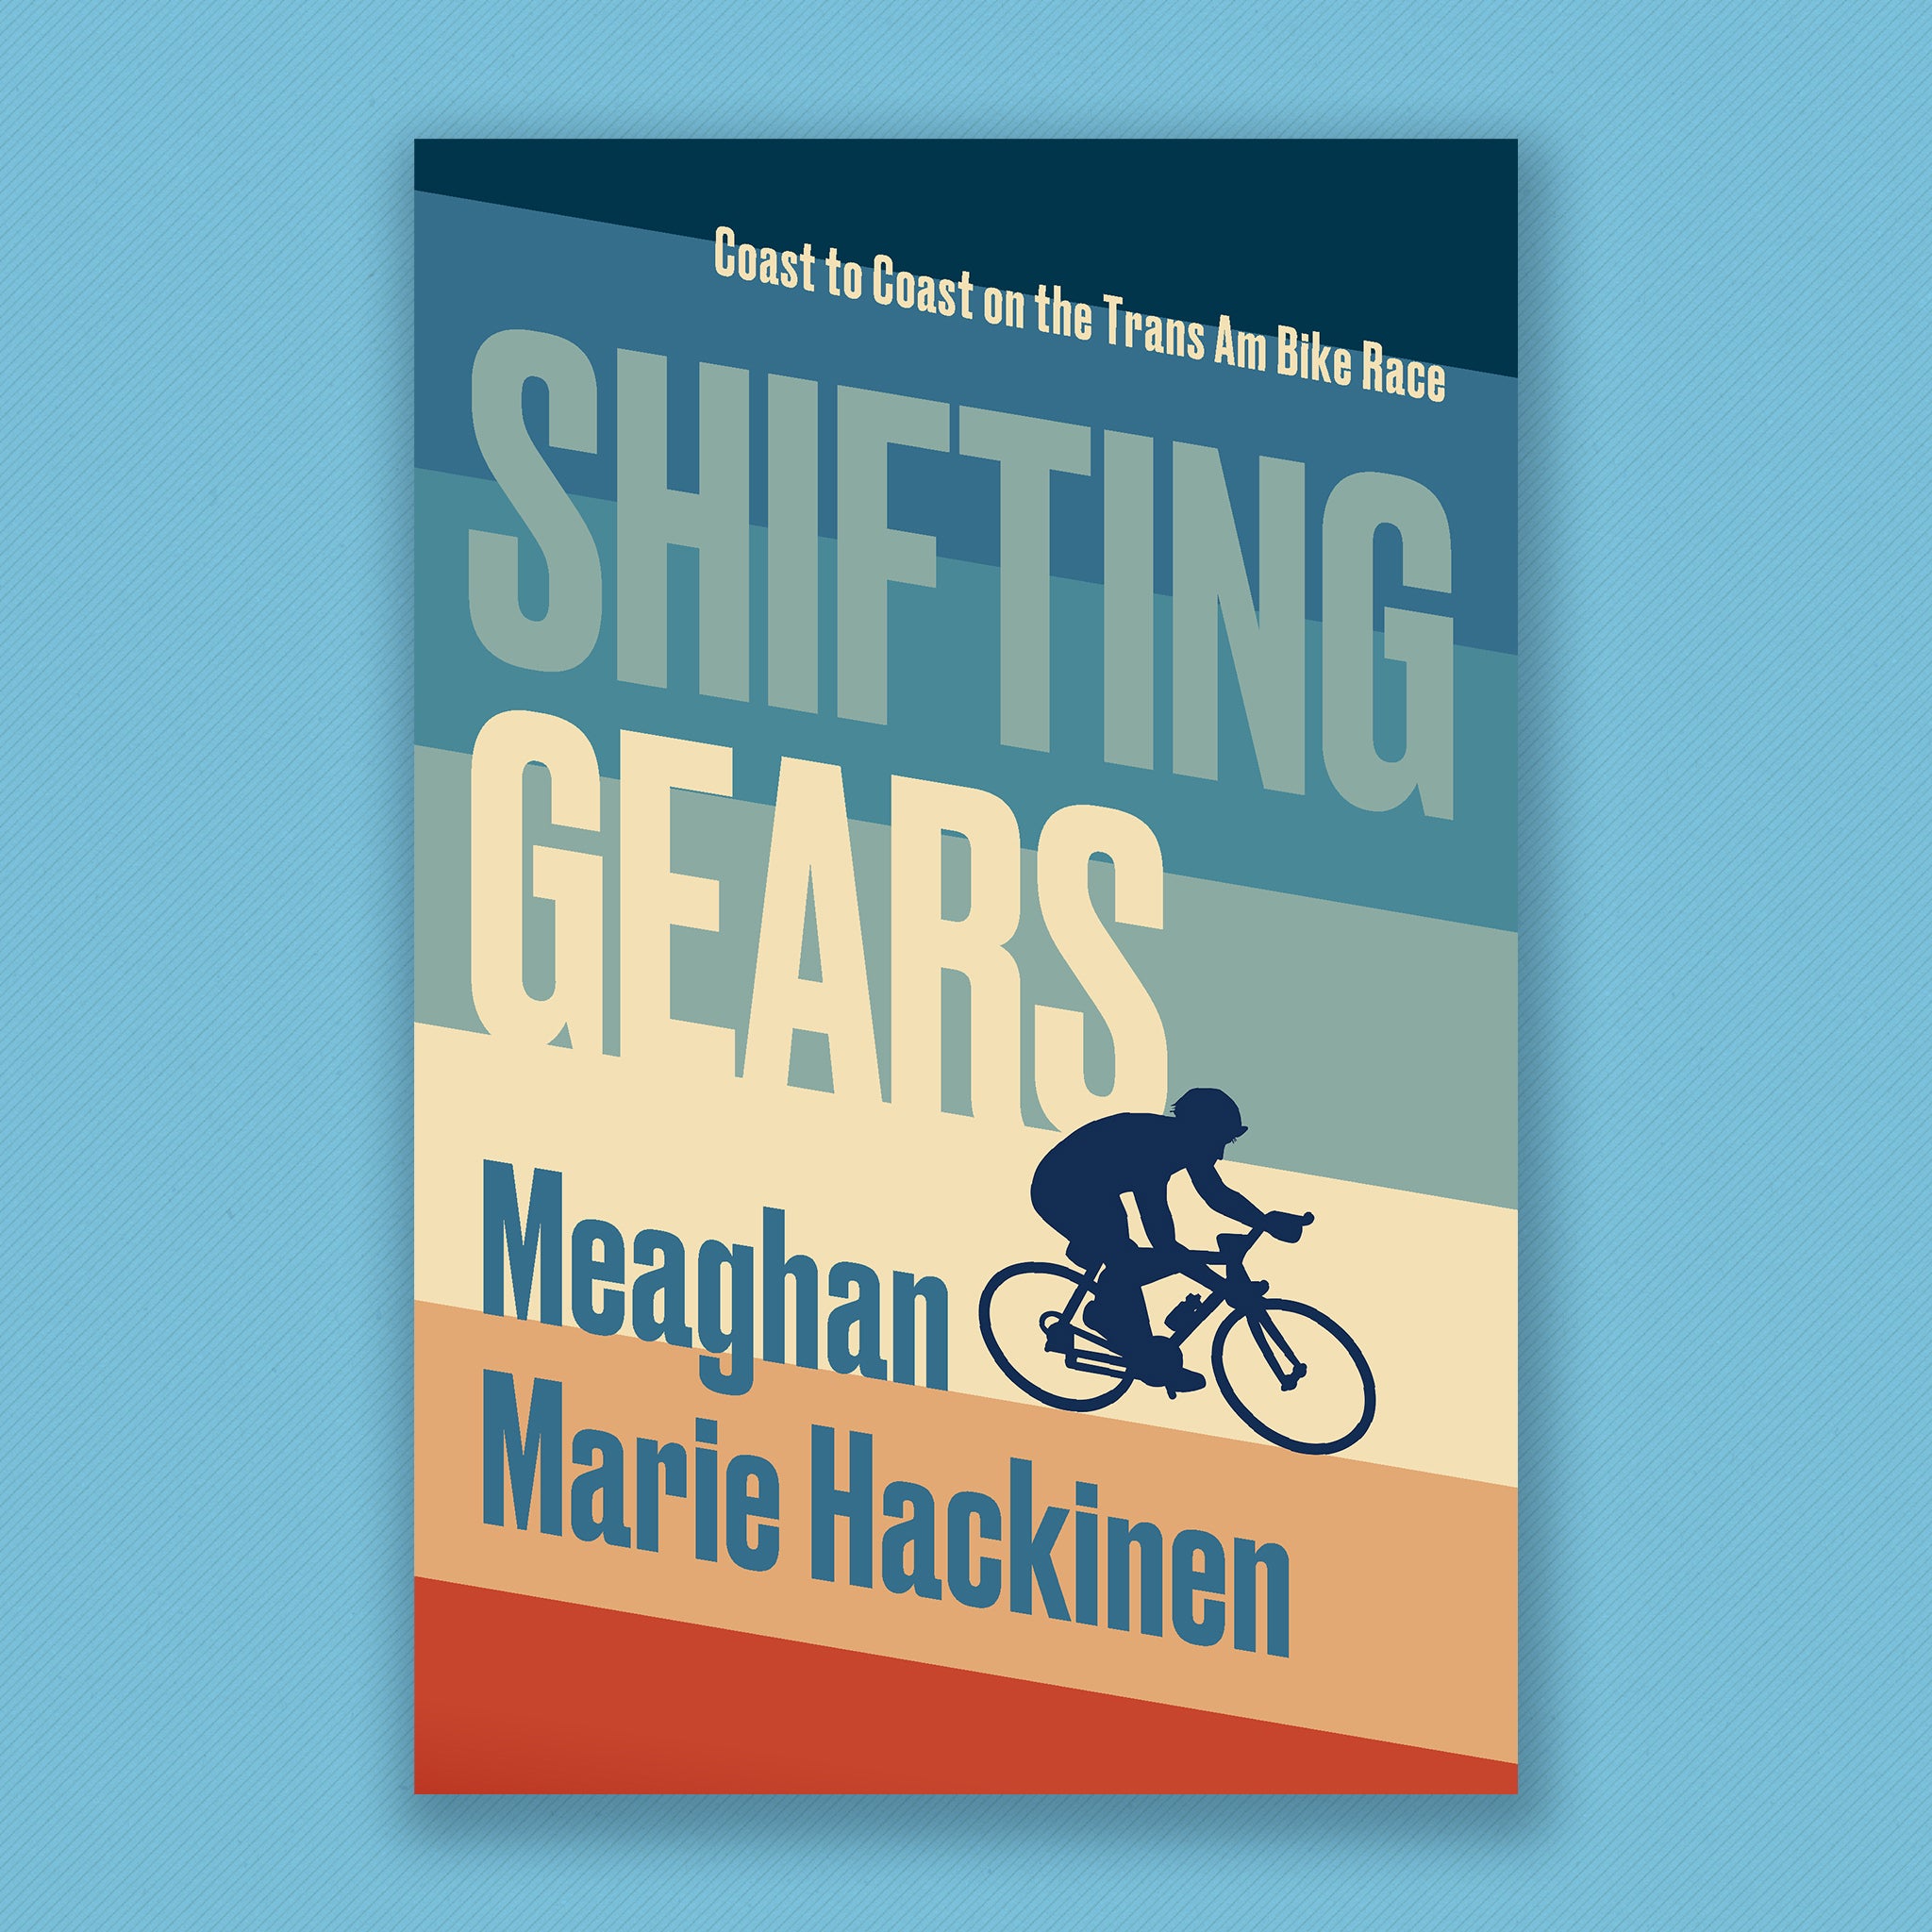 Diagonal vertical stripes move through shades of blue, cream, and finally bright read from top to bottom, with large text following the lines of the stripes and a silhouetted cyclist nestled on the right of cover, cycling off the covers edge. Full text reads: “Shifting Gears: Coast to Coast on the Trans Am Bike Race. Meaghan Marie Hackinen”.